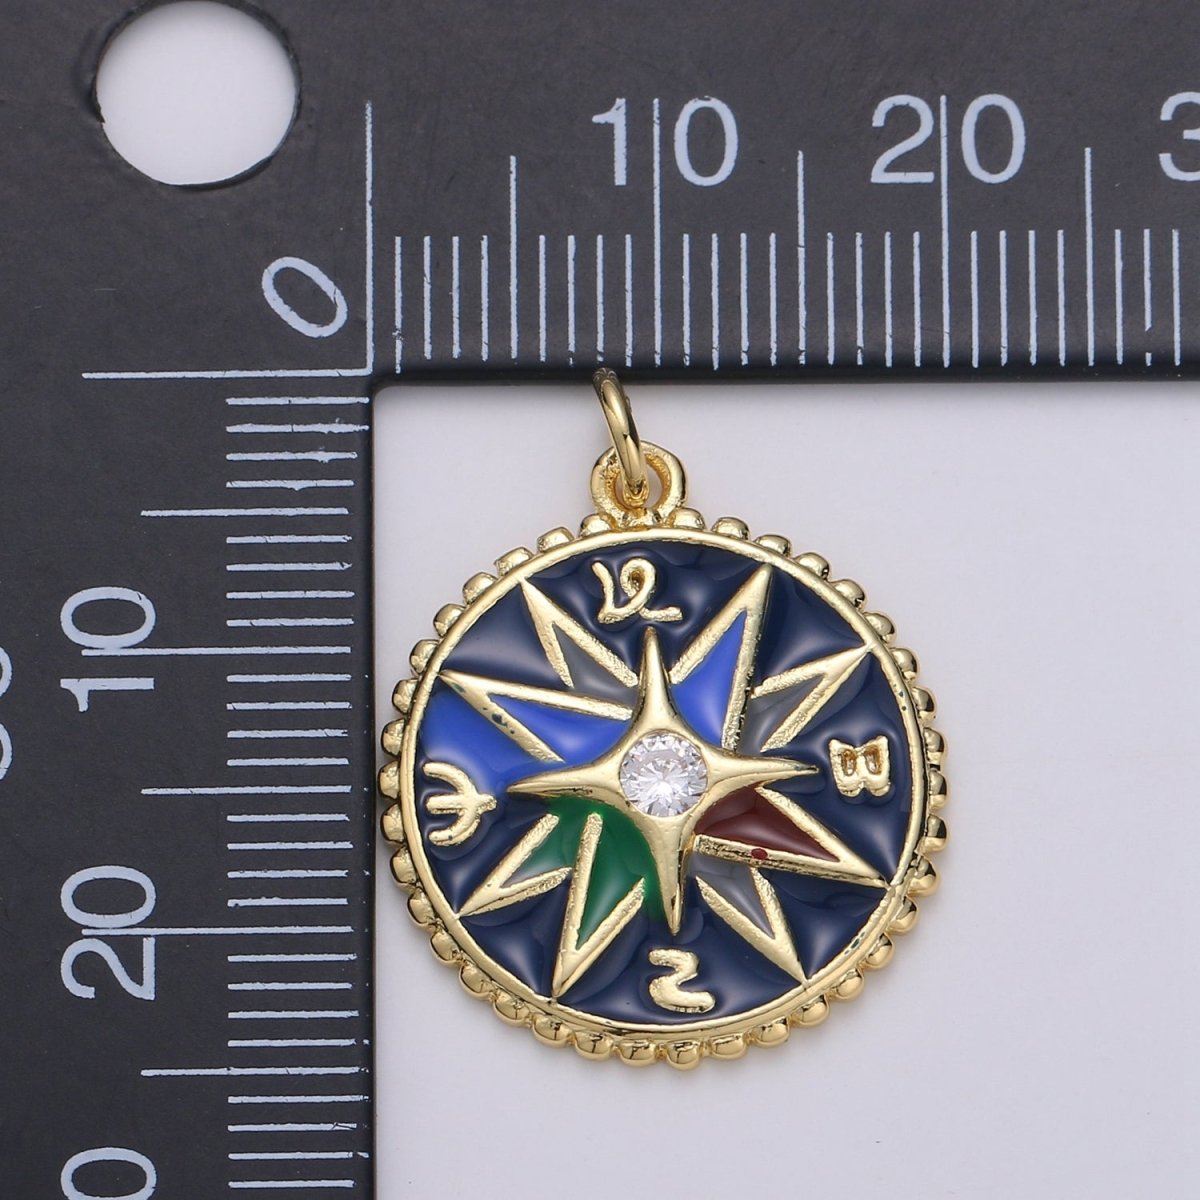 Enamel charms 24K Gold Filled compass charm, Epoxy Blue pendant, talisman charm Travel Jewelry Adventure Designer Inspired Necklace D-866 - DLUXCA